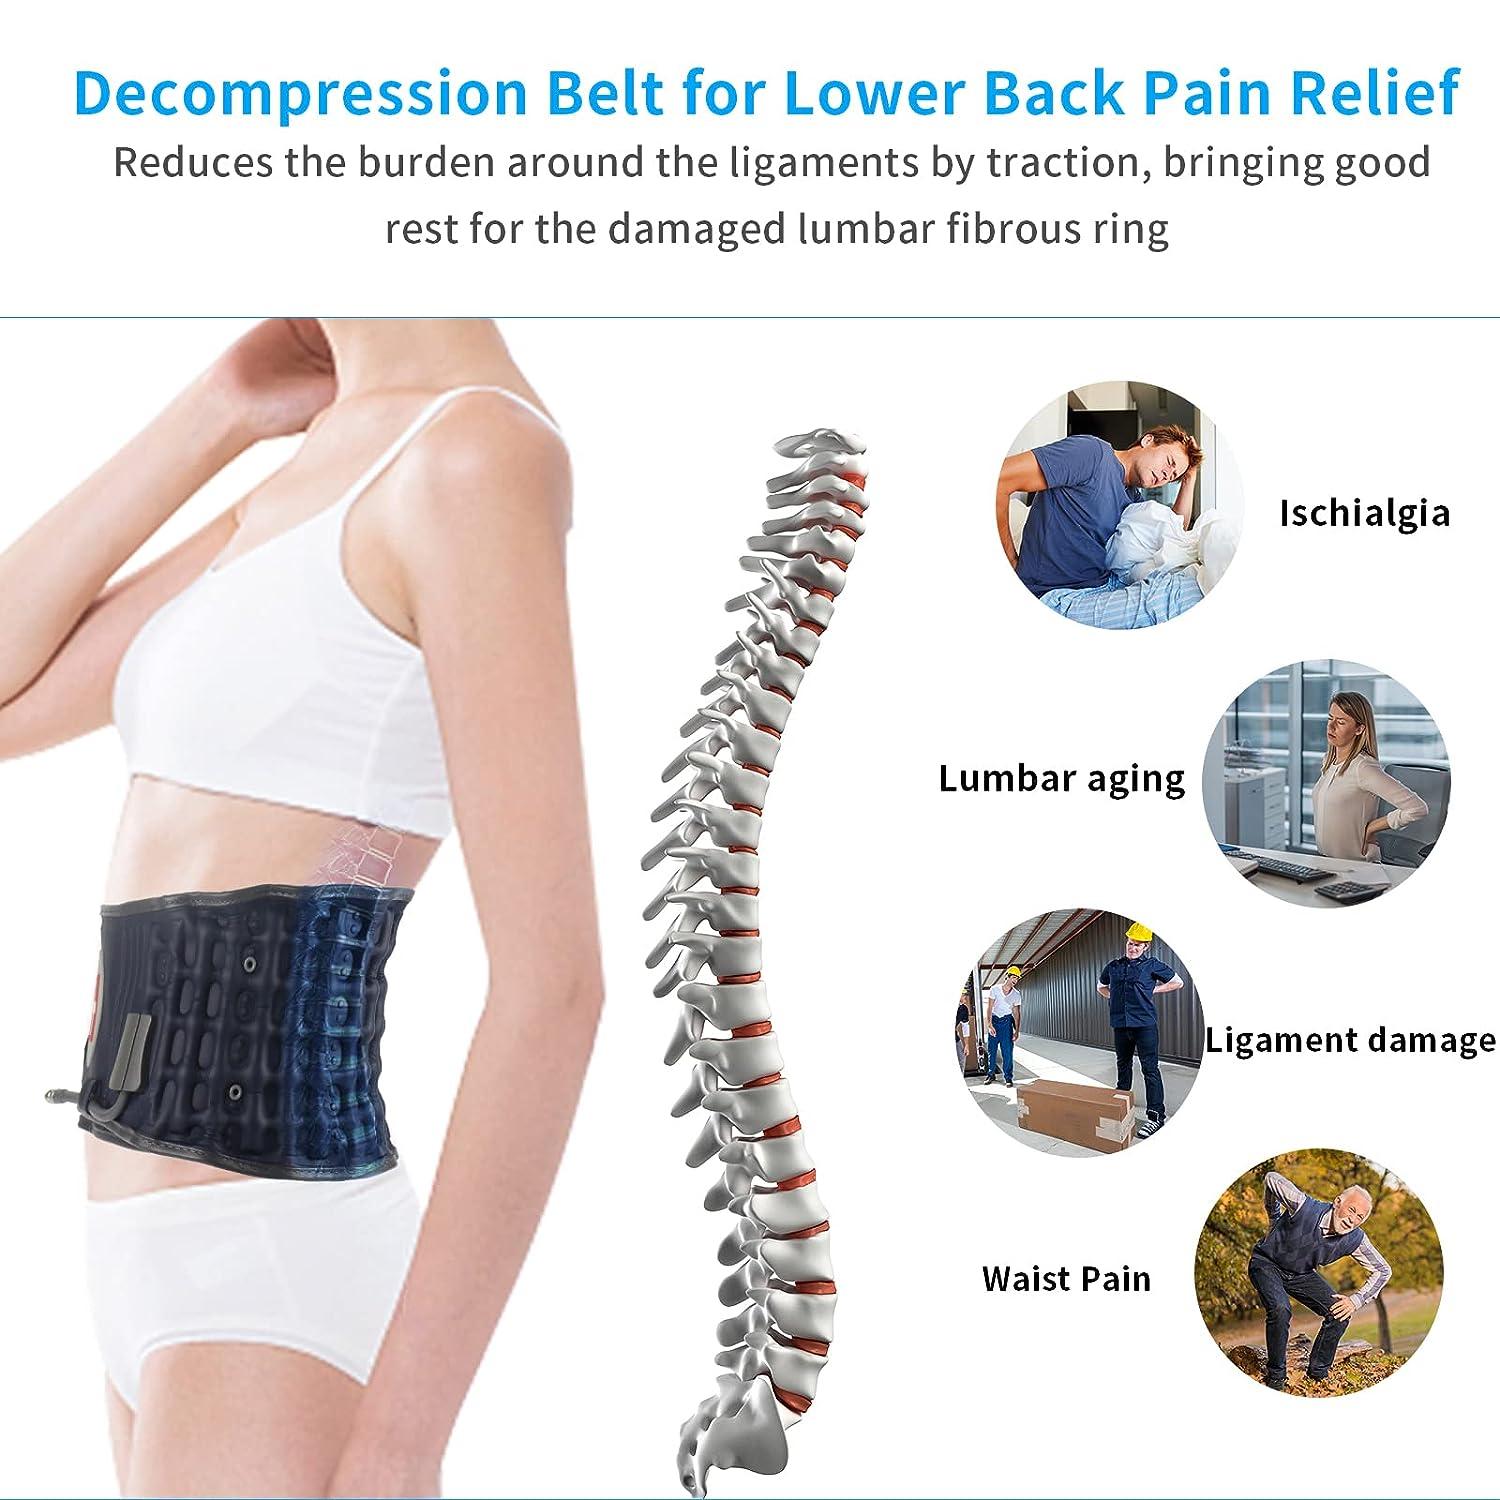 LUMINA data demonstrate 70% greater low back pain relief with